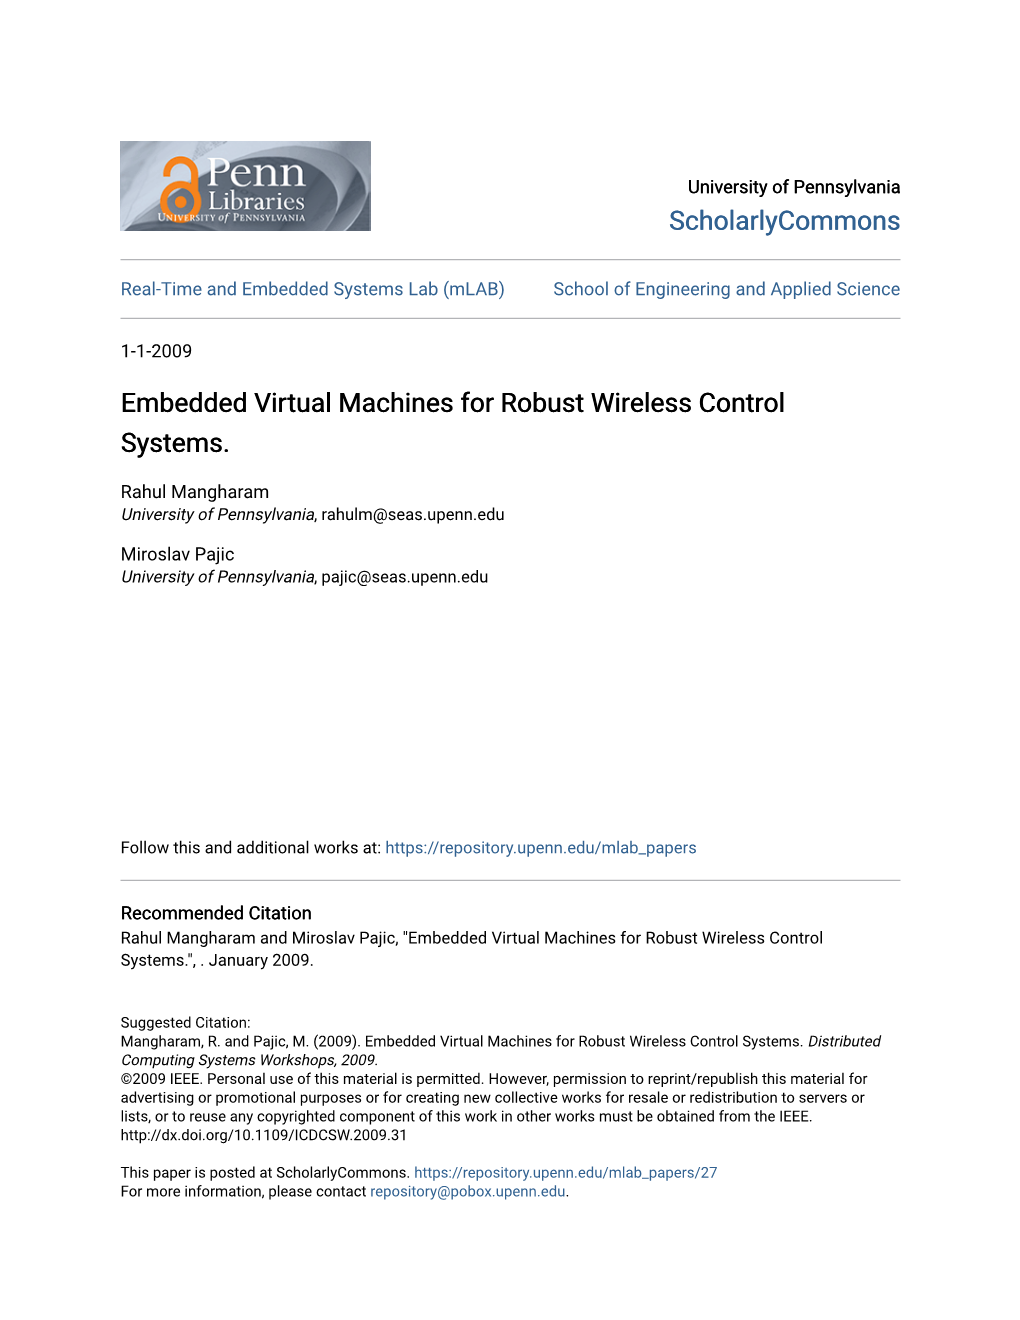 Embedded Virtual Machines for Robust Wireless Control Systems